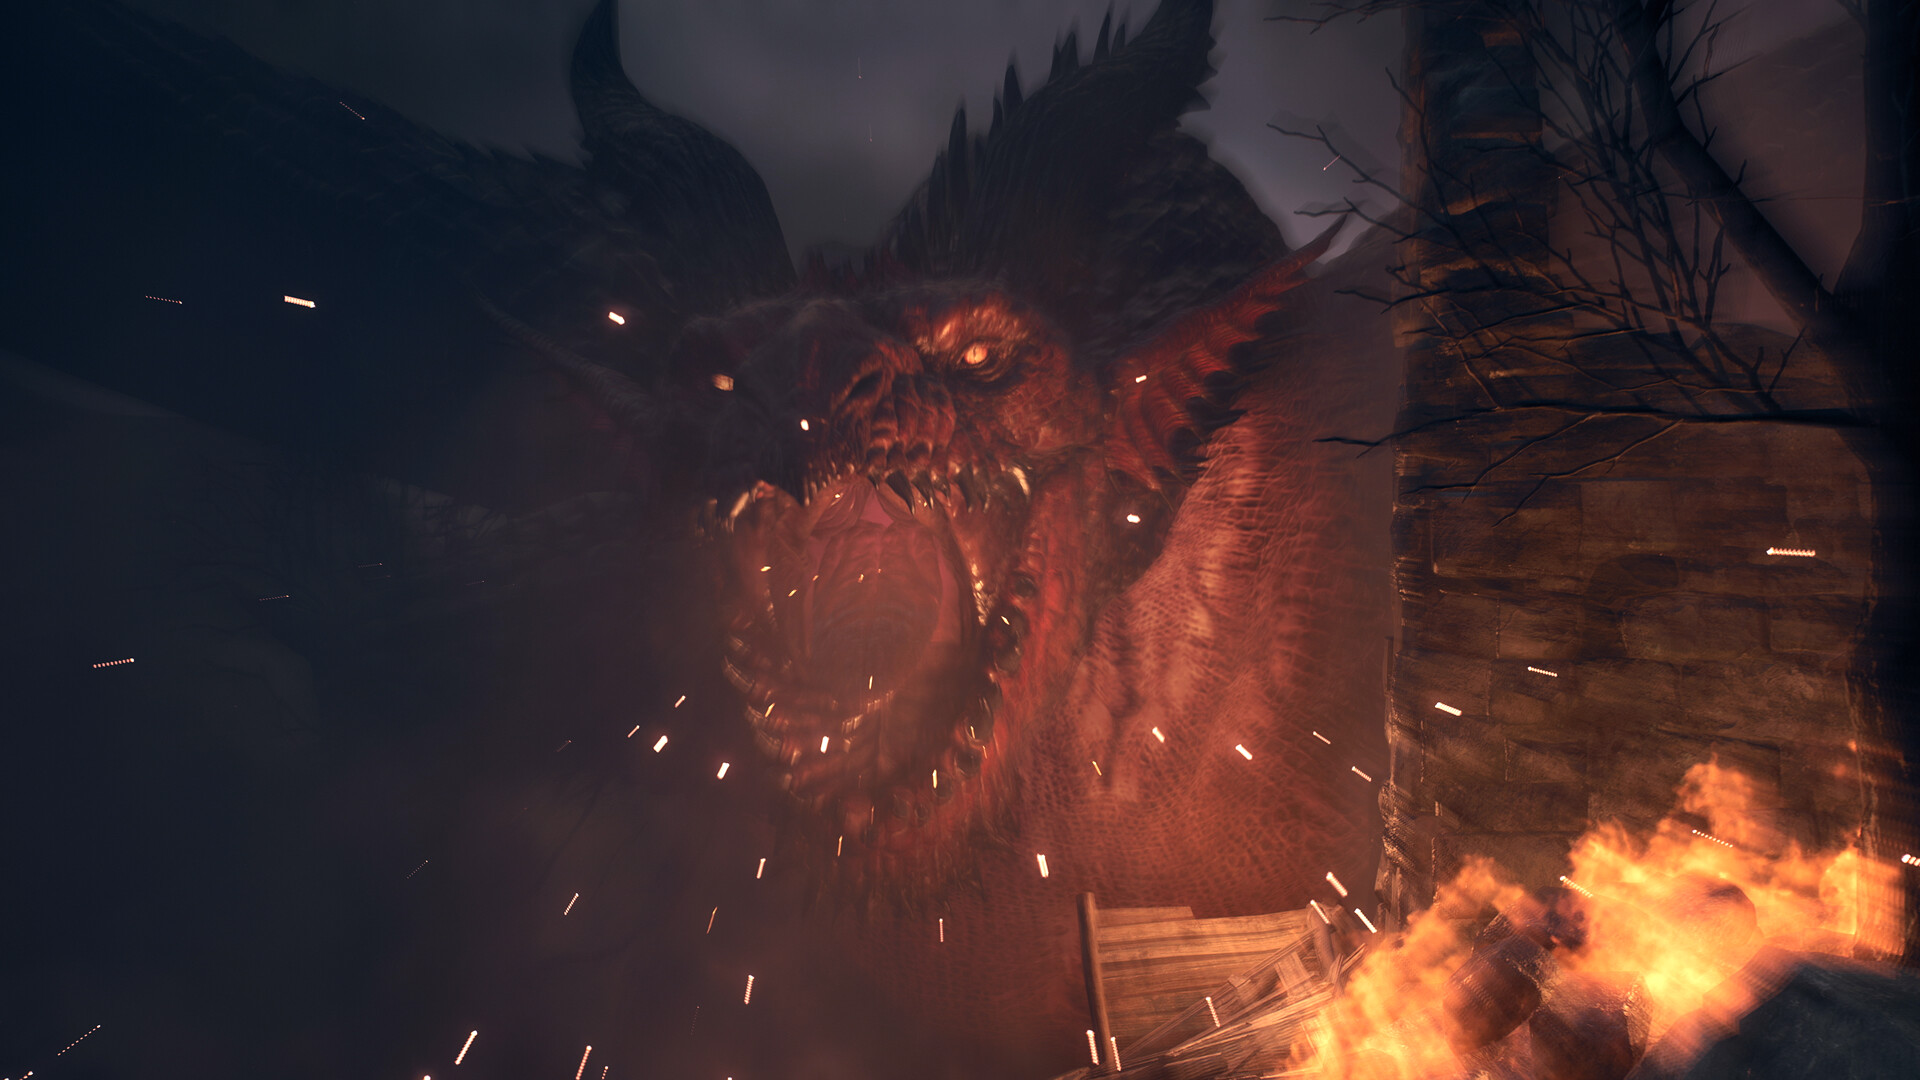 We Played Dragon's Dogma 2 for 1 HOUR! - PREVIEW 